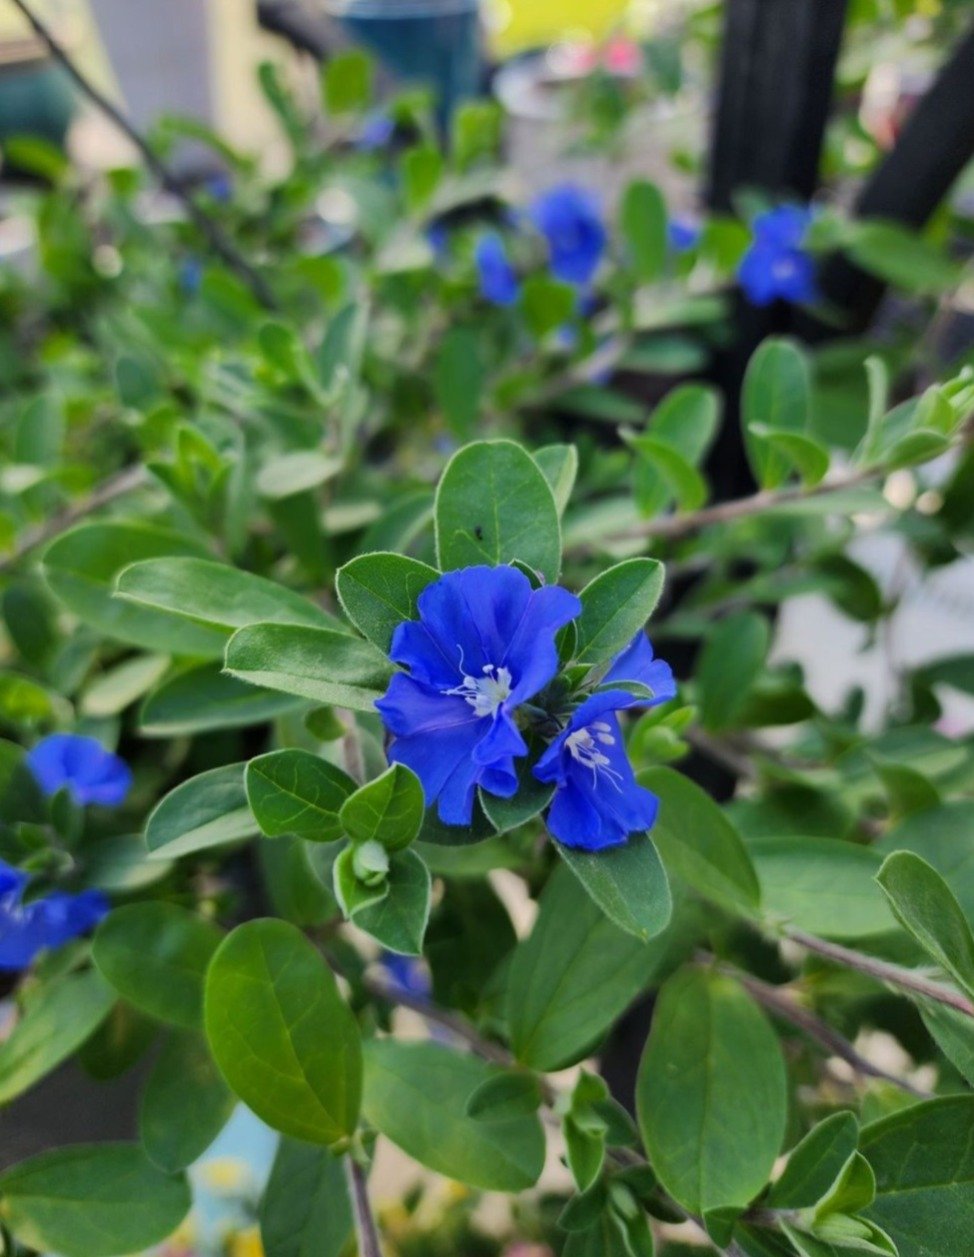  Blue Daze flower blooming in pot, Evolvulus glomeratus ground cover plant.